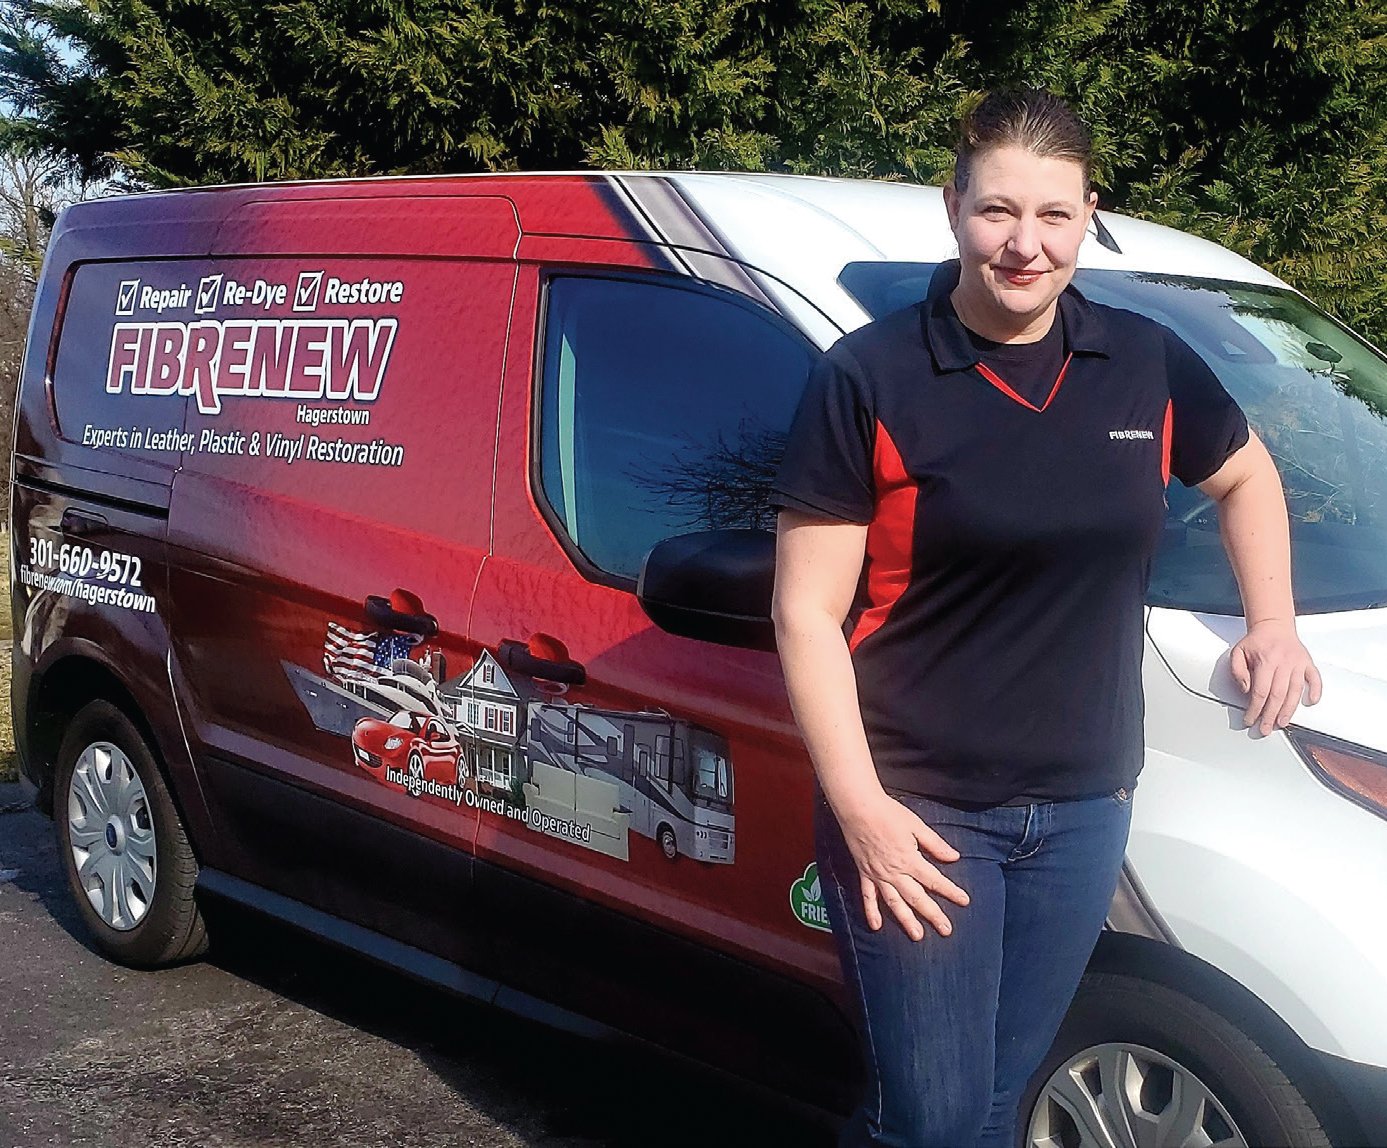 Personal Touch: Fibrenew Franchisee Suzanne Tinelli